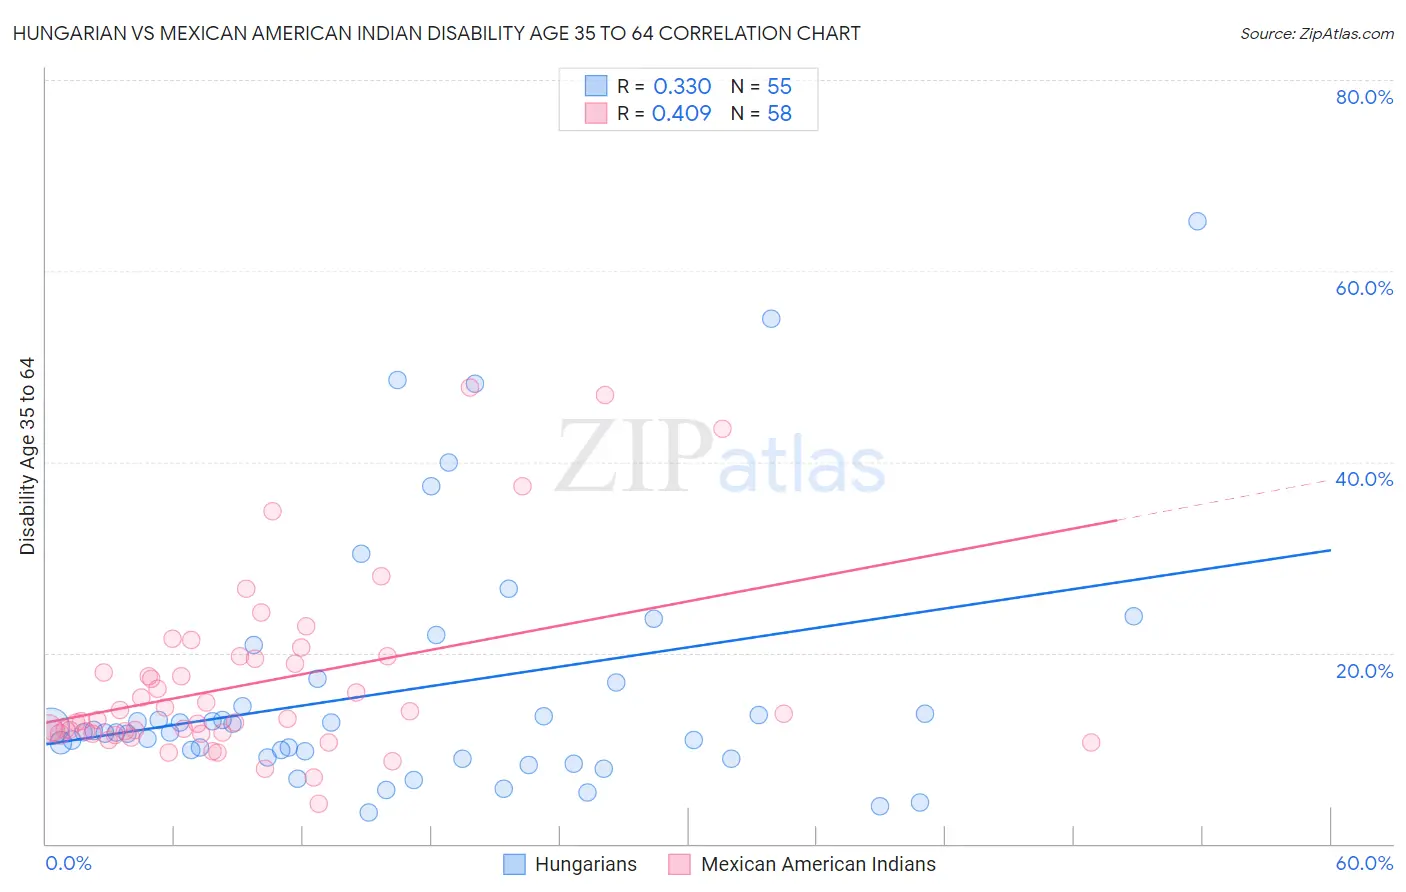 Hungarian vs Mexican American Indian Disability Age 35 to 64